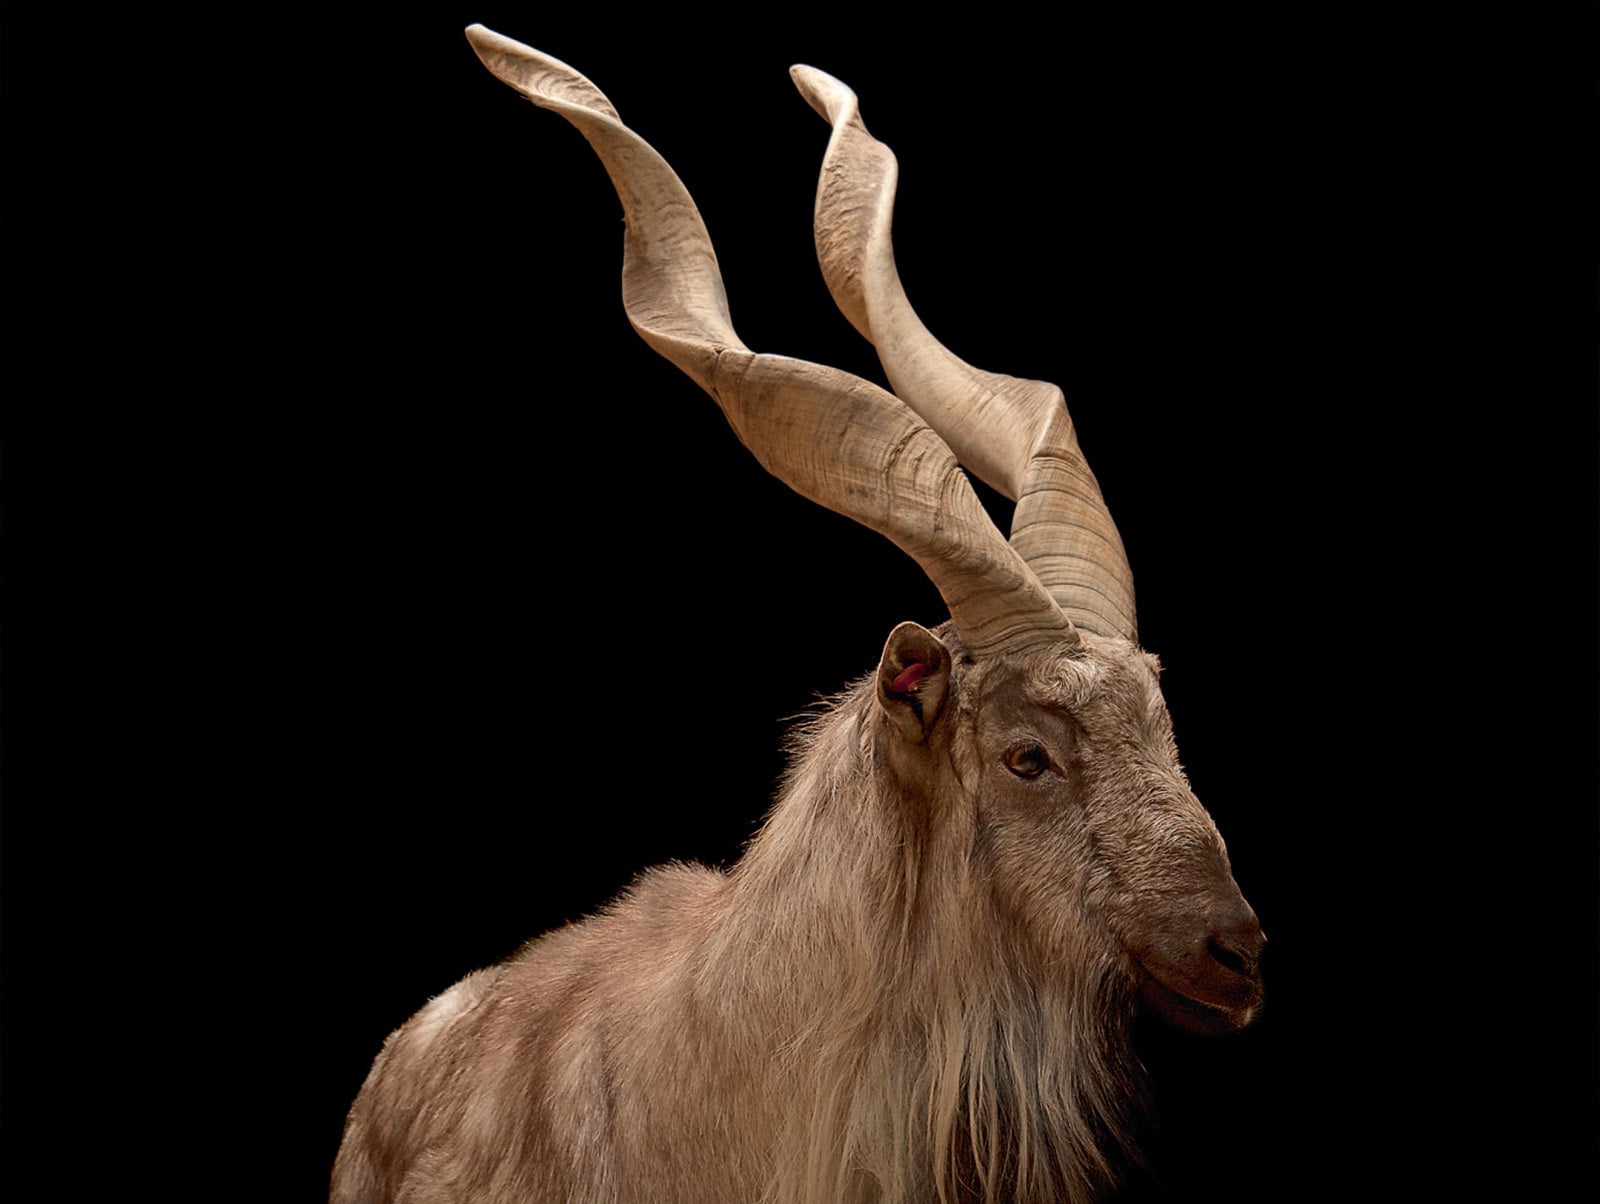 Markhor (Capra falconeri) - Also known as the screw-horned goat, the markhor is the national animal of Pakistan. Its name may be derived from the Persian for "snake-eater," and while it is known to kill and eat serpents, its spiral horns also resemble coiling snakes. The markhor is a mountain herbivore with keen senses of smell and sight.